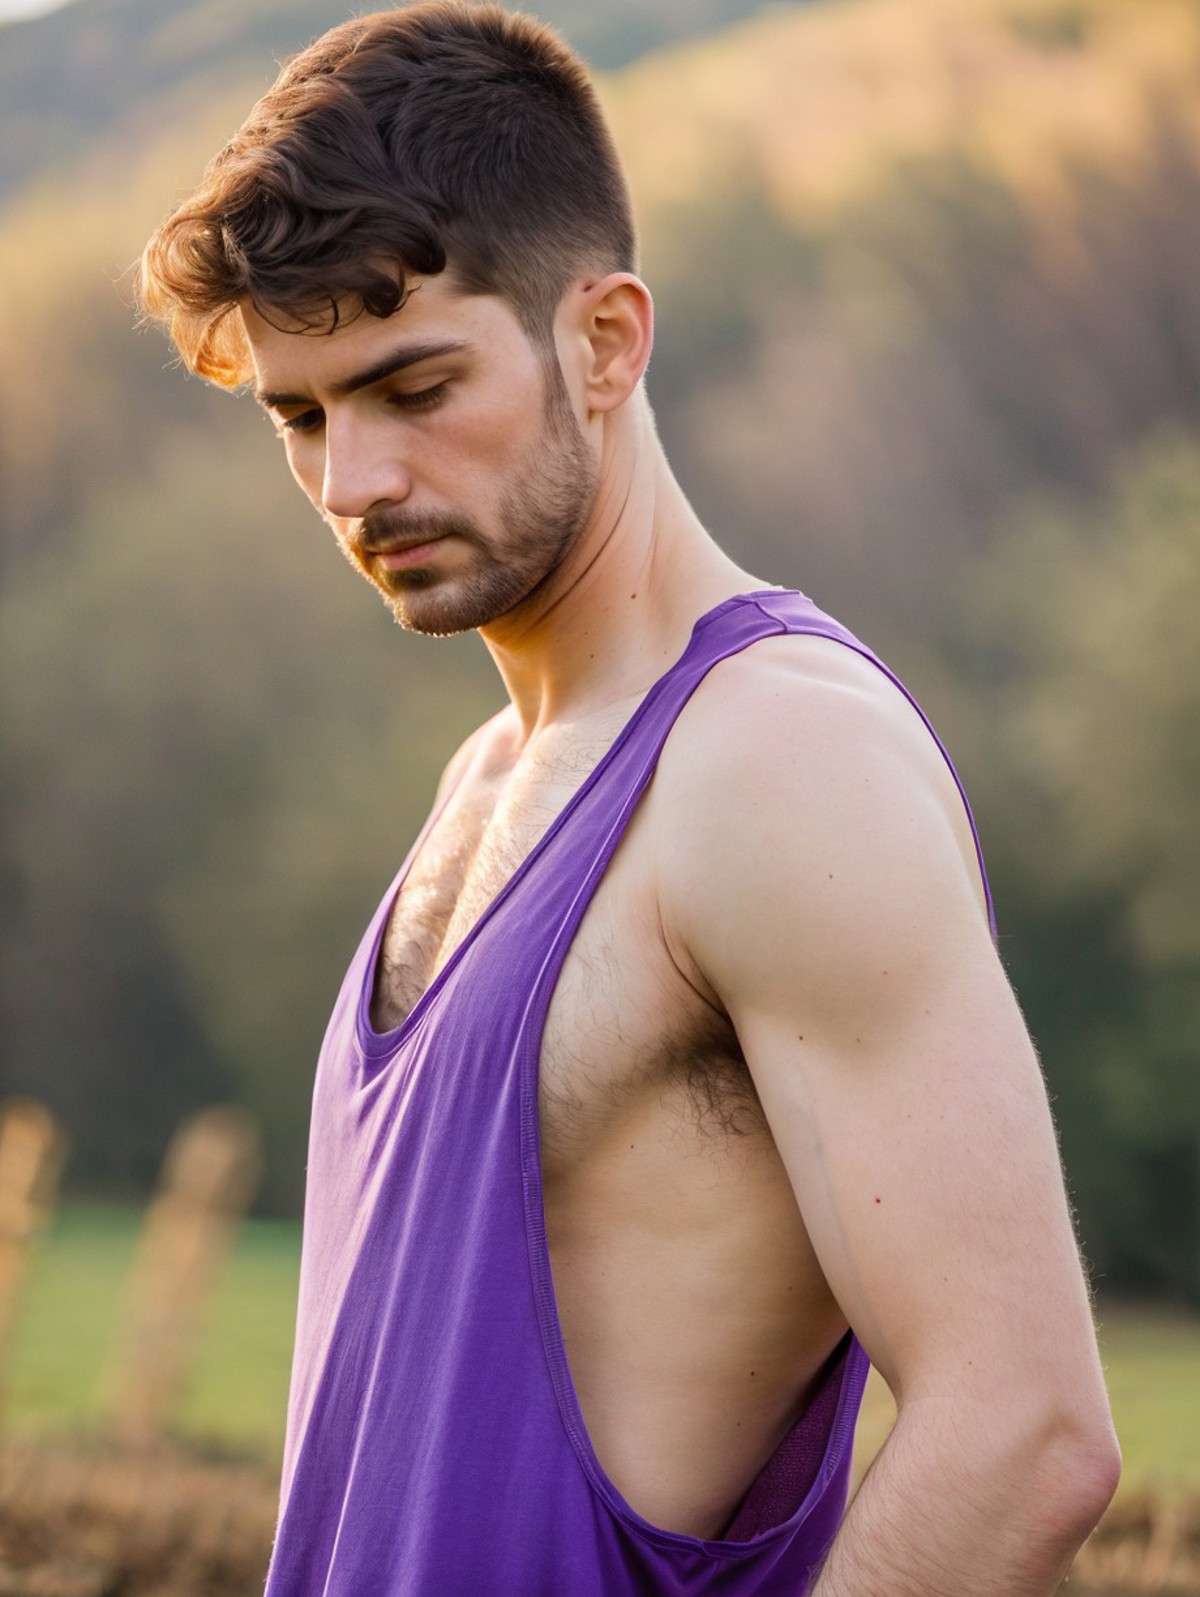 Stringer Gym Tank Top / Dropped Side Holes / Large Armholes – SD 1.5 image by diogod